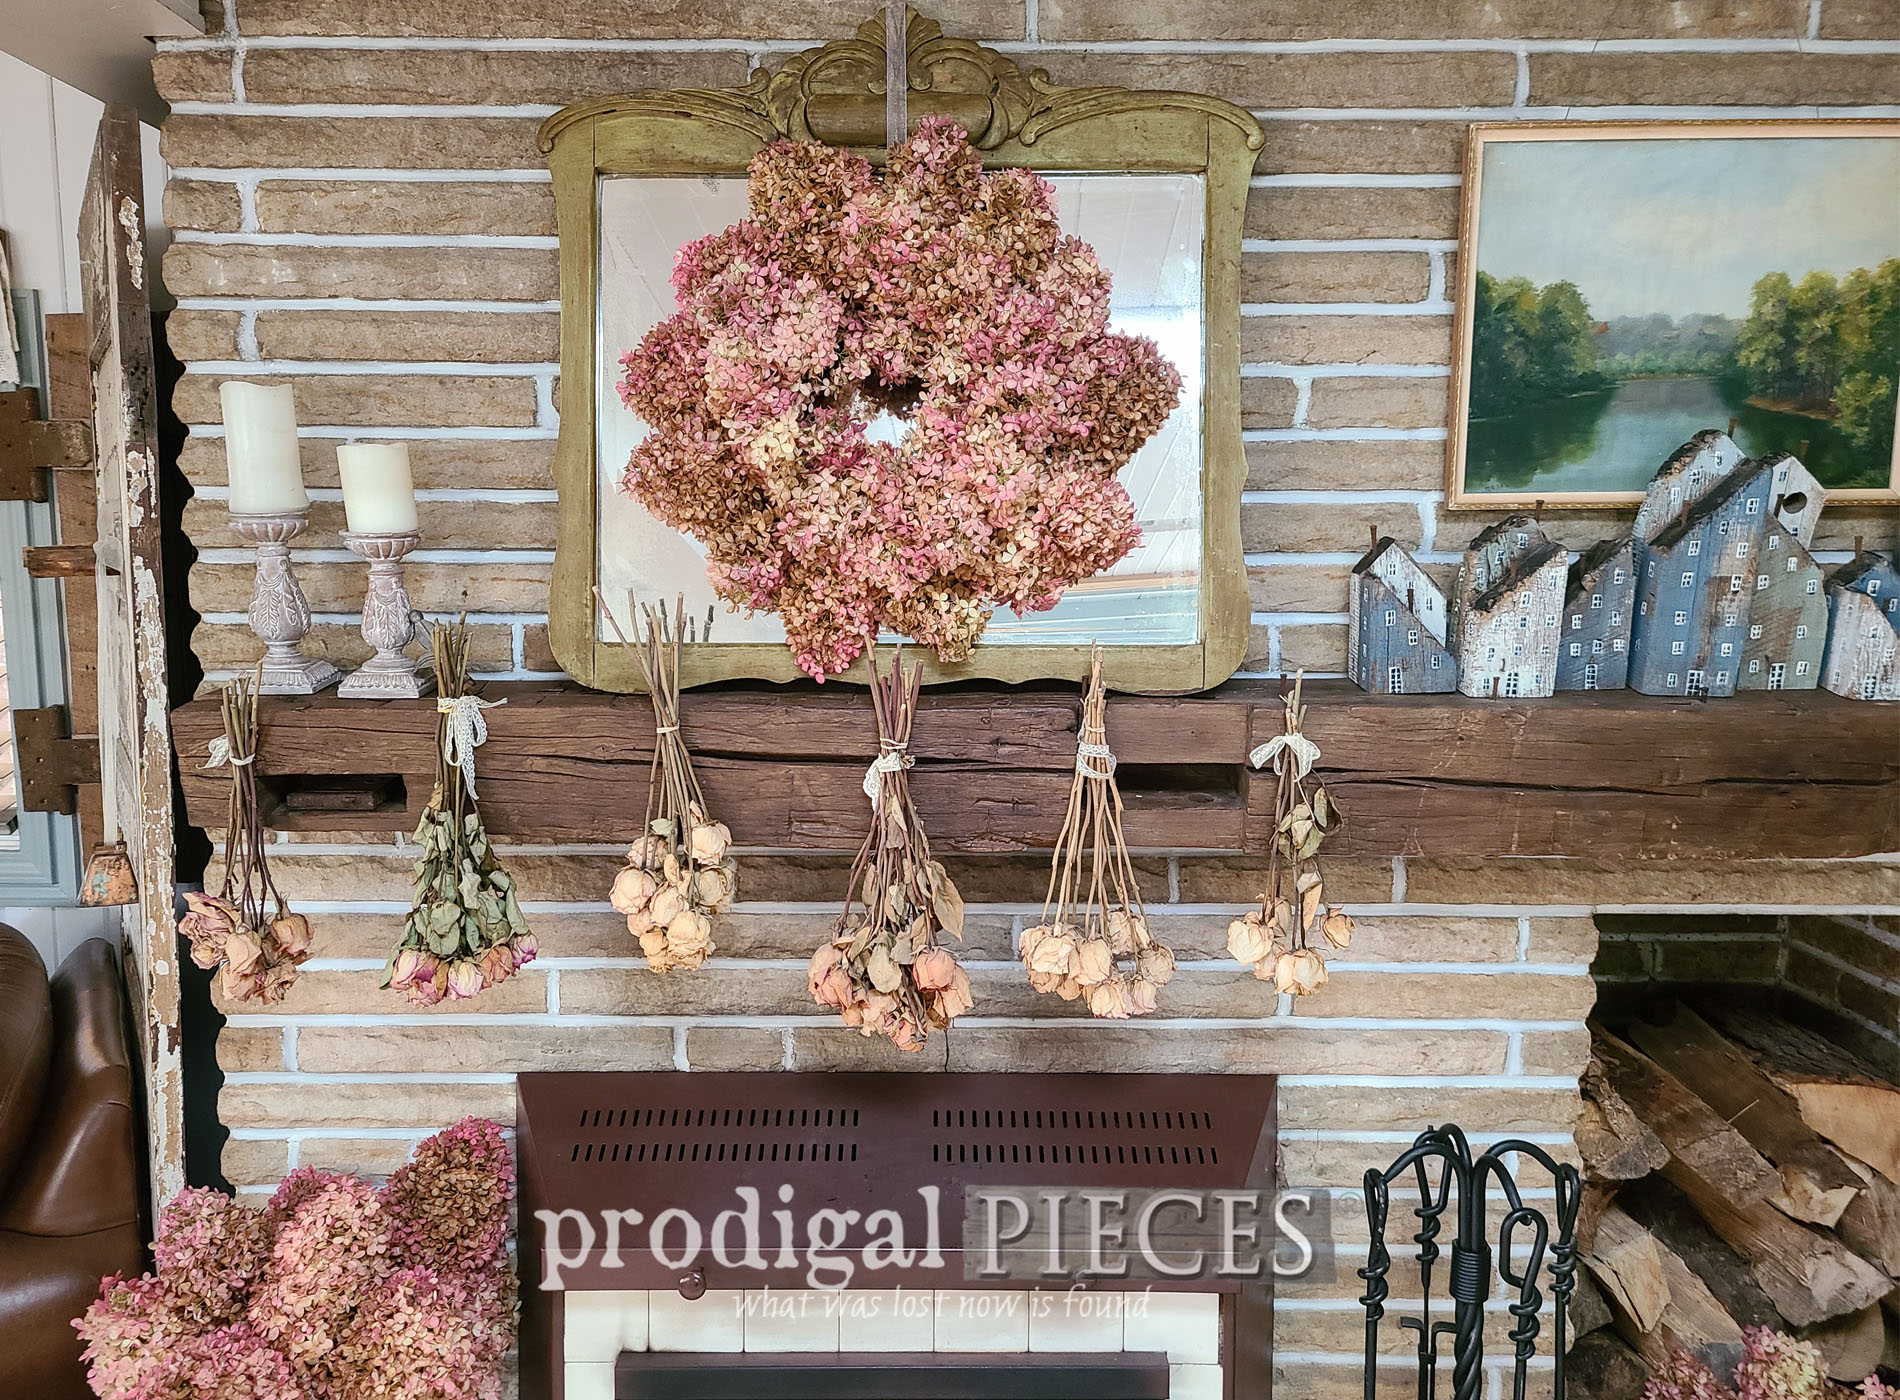 Featured DIY Hydrangea Wreath for Autumn Home Decor by Larissa of Prodigal Pieces | prodigalpieces.com #prodigalpieces #diy #fall #wreath #home #farmhouse